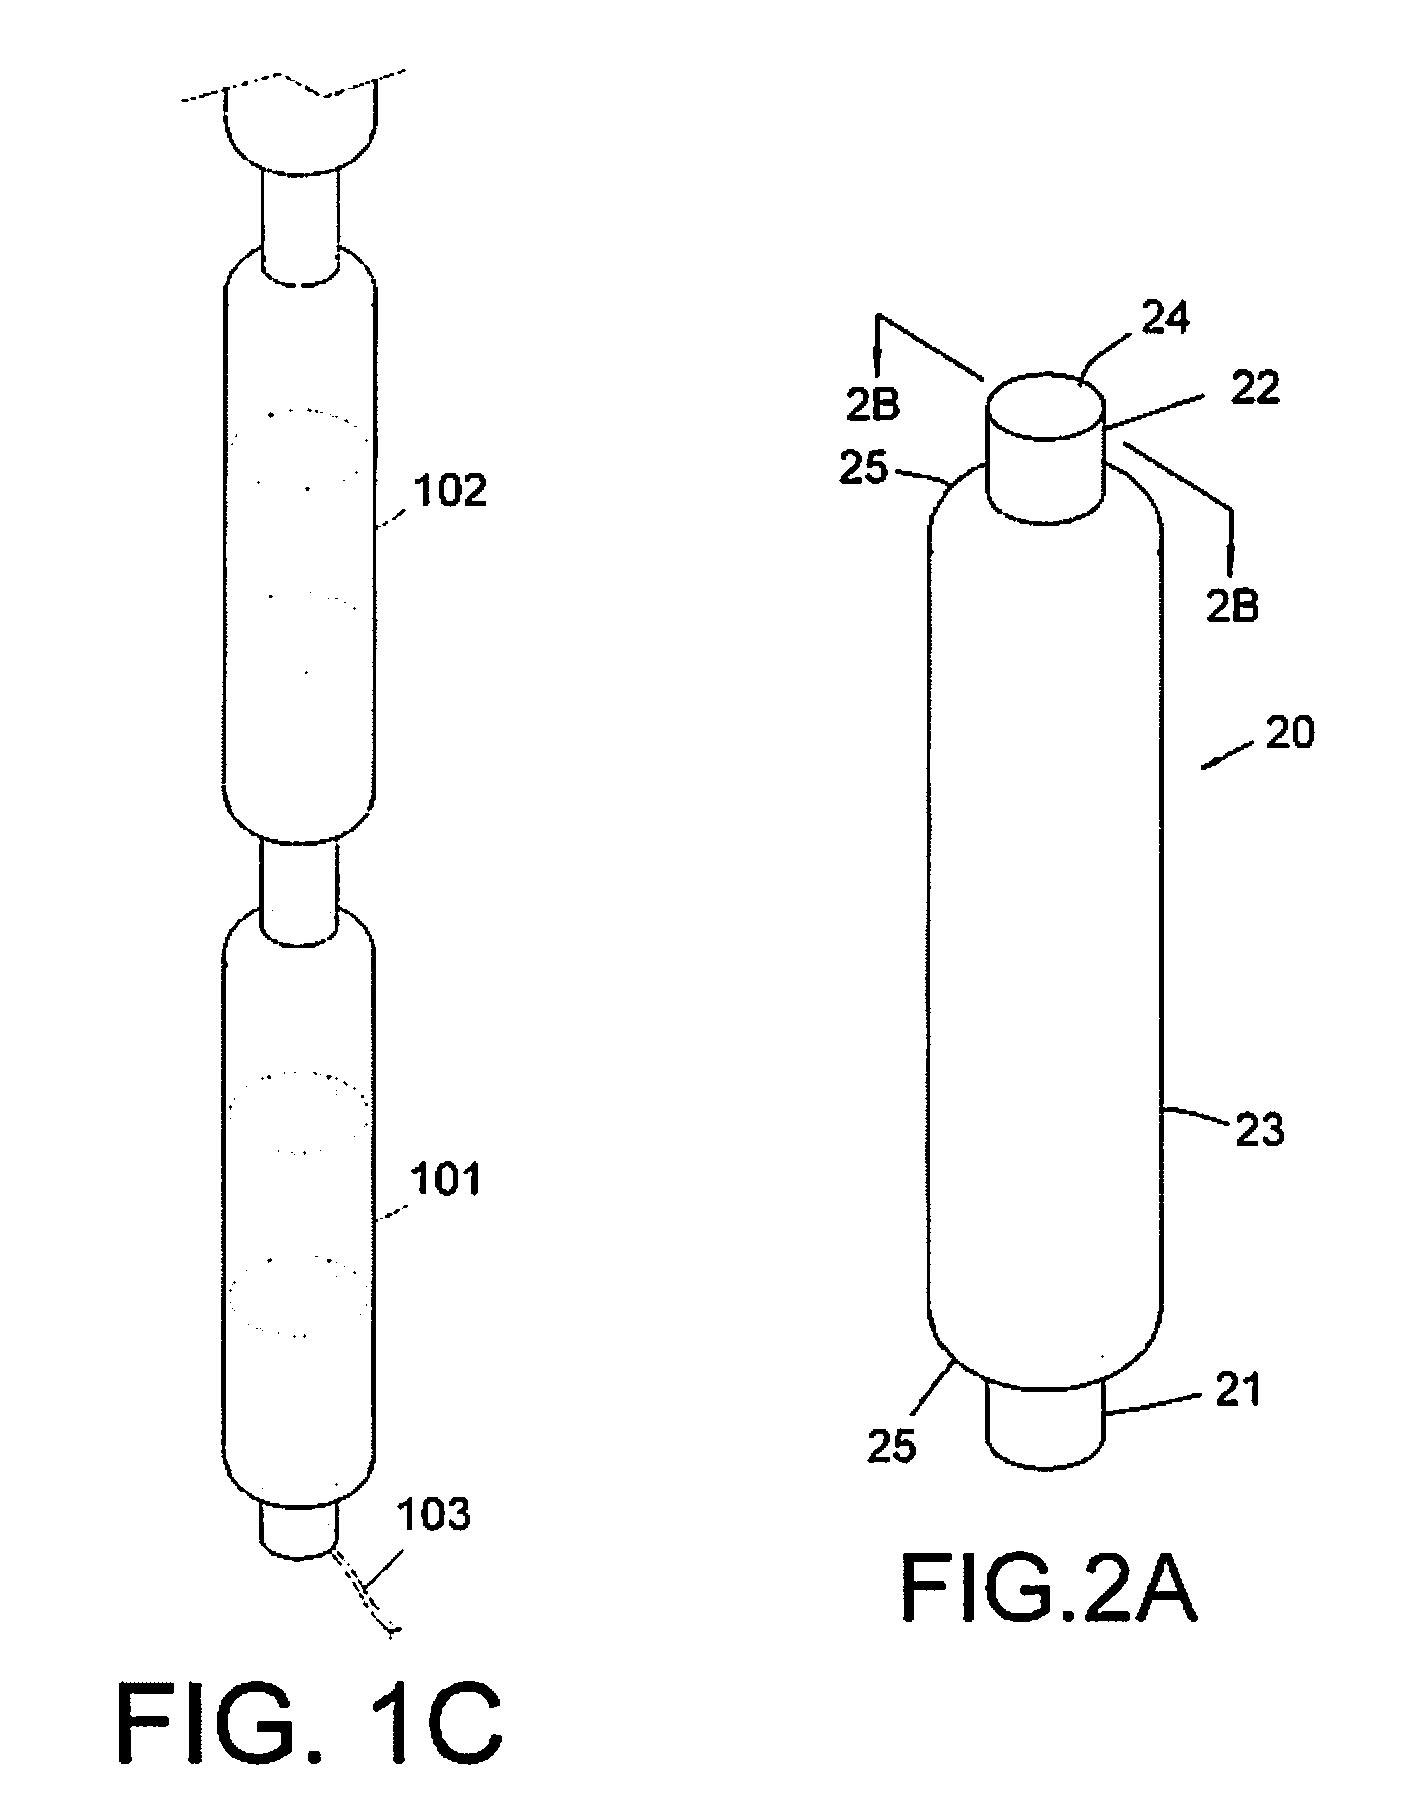 Inflatable artificial muscle for elongated instrument